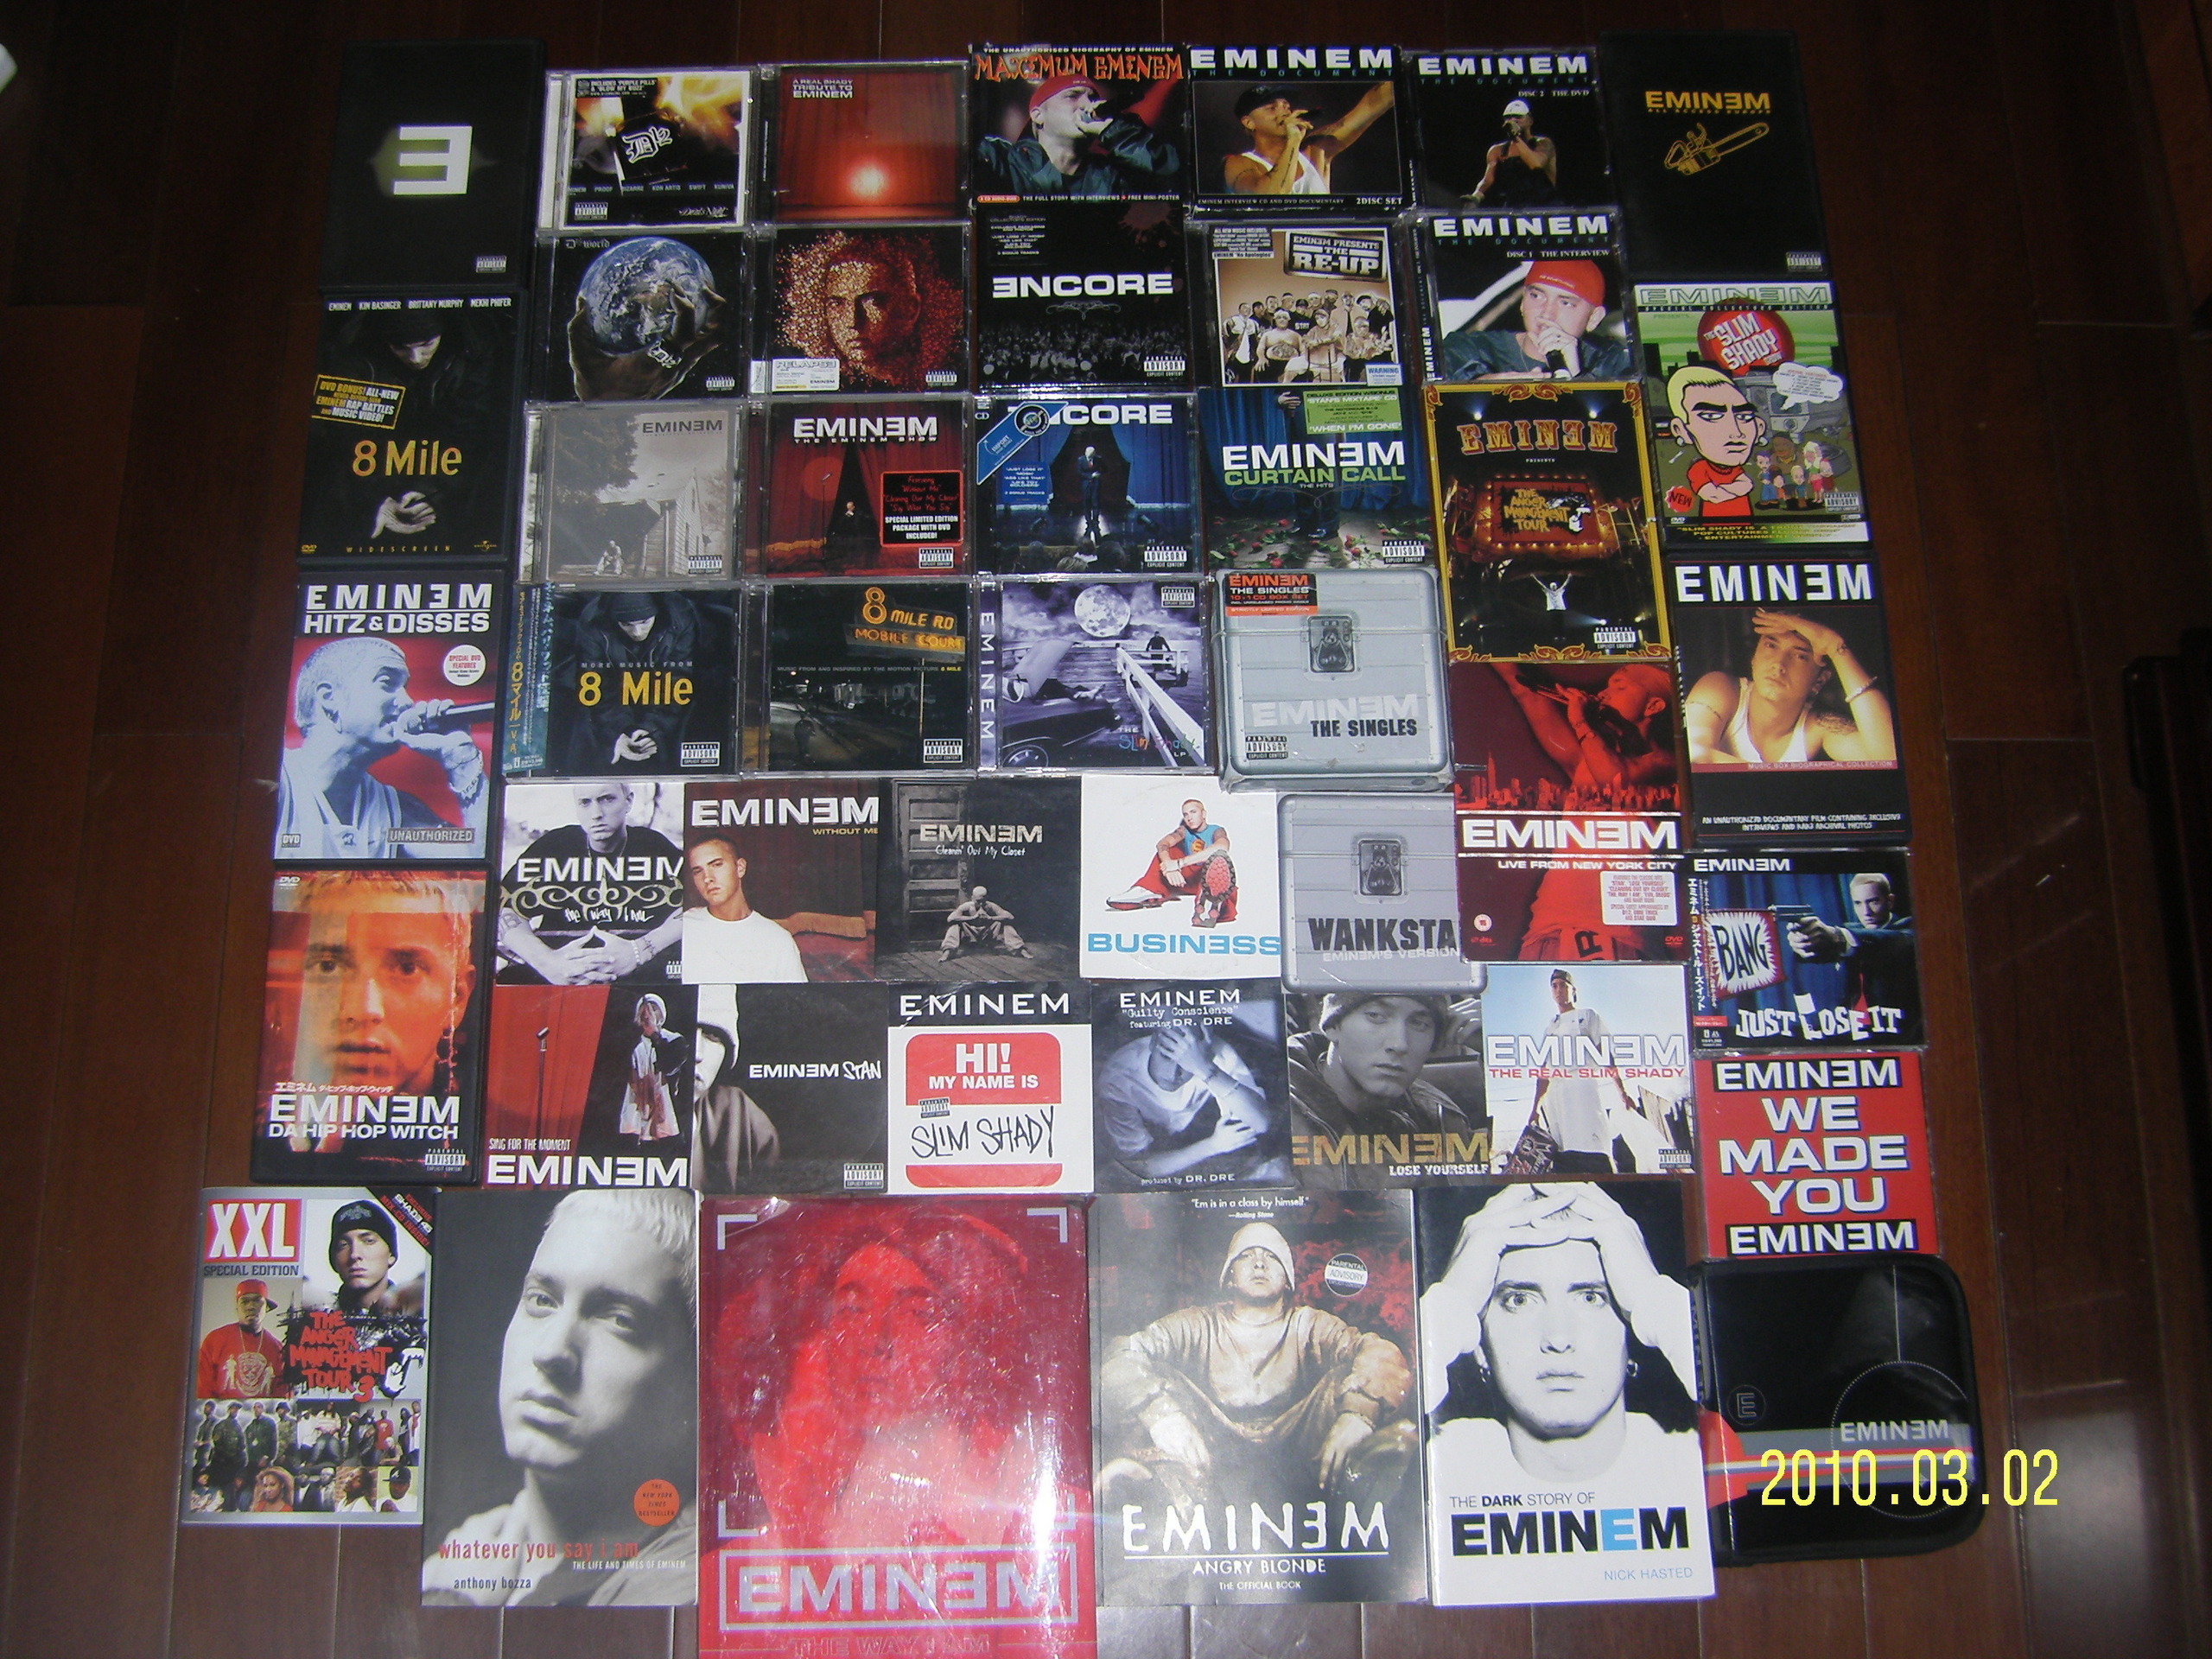 Fan Art of My eminem cd dvd collection! ; ) for fans of EMINEM. this was my...